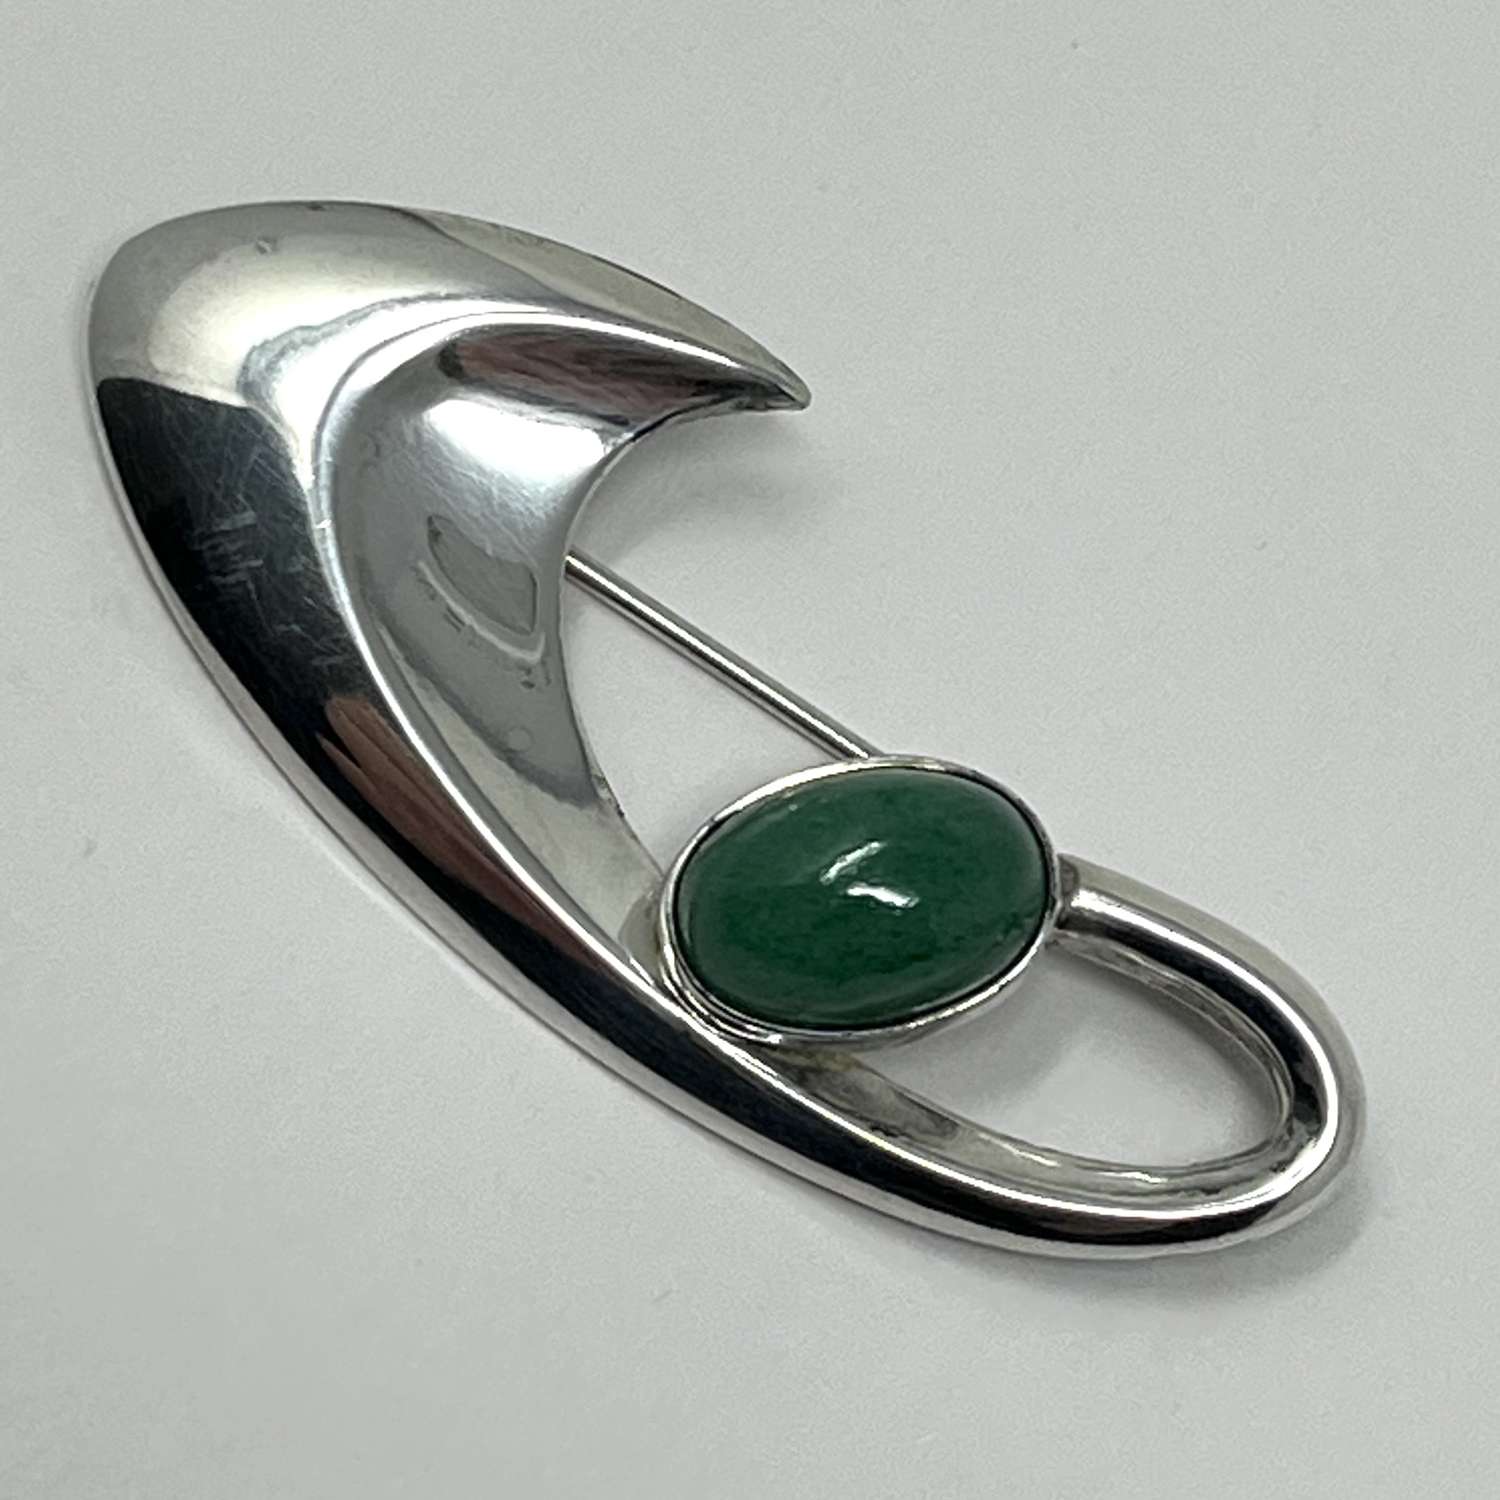 Modernist brooch with green cabochon, Finland 1960s